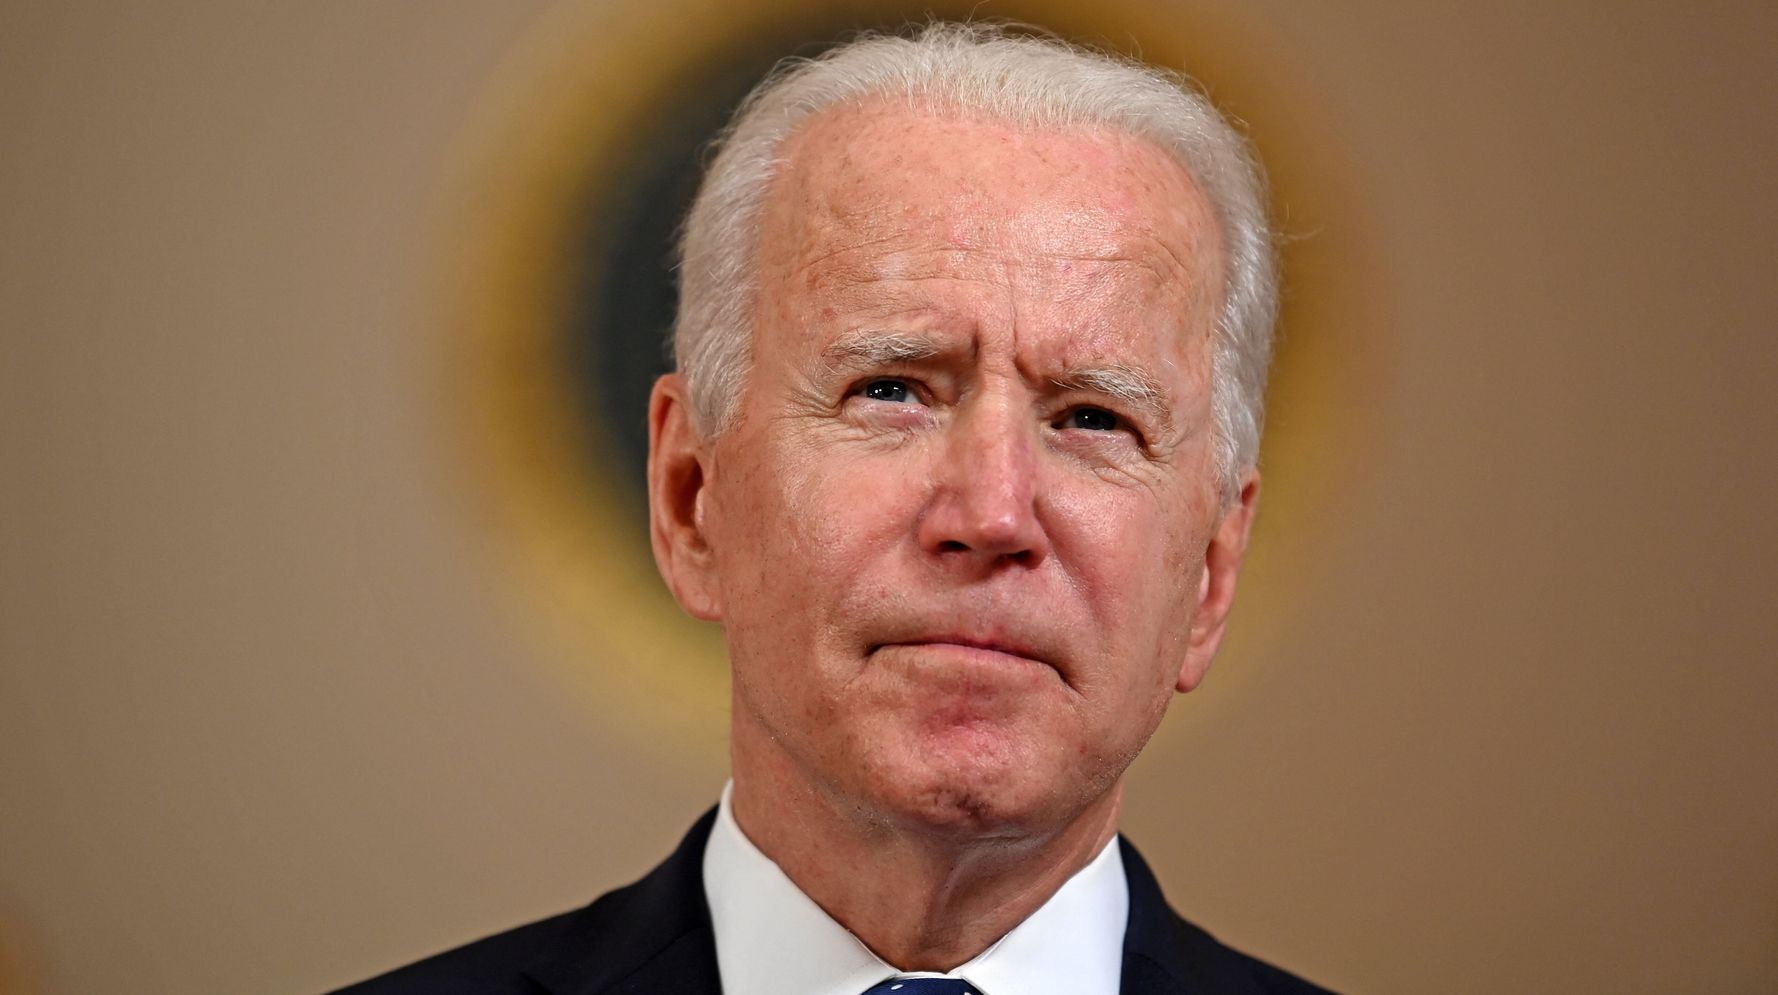 5 Things To Watch For At Biden’s Big Earth Day Climate Summit